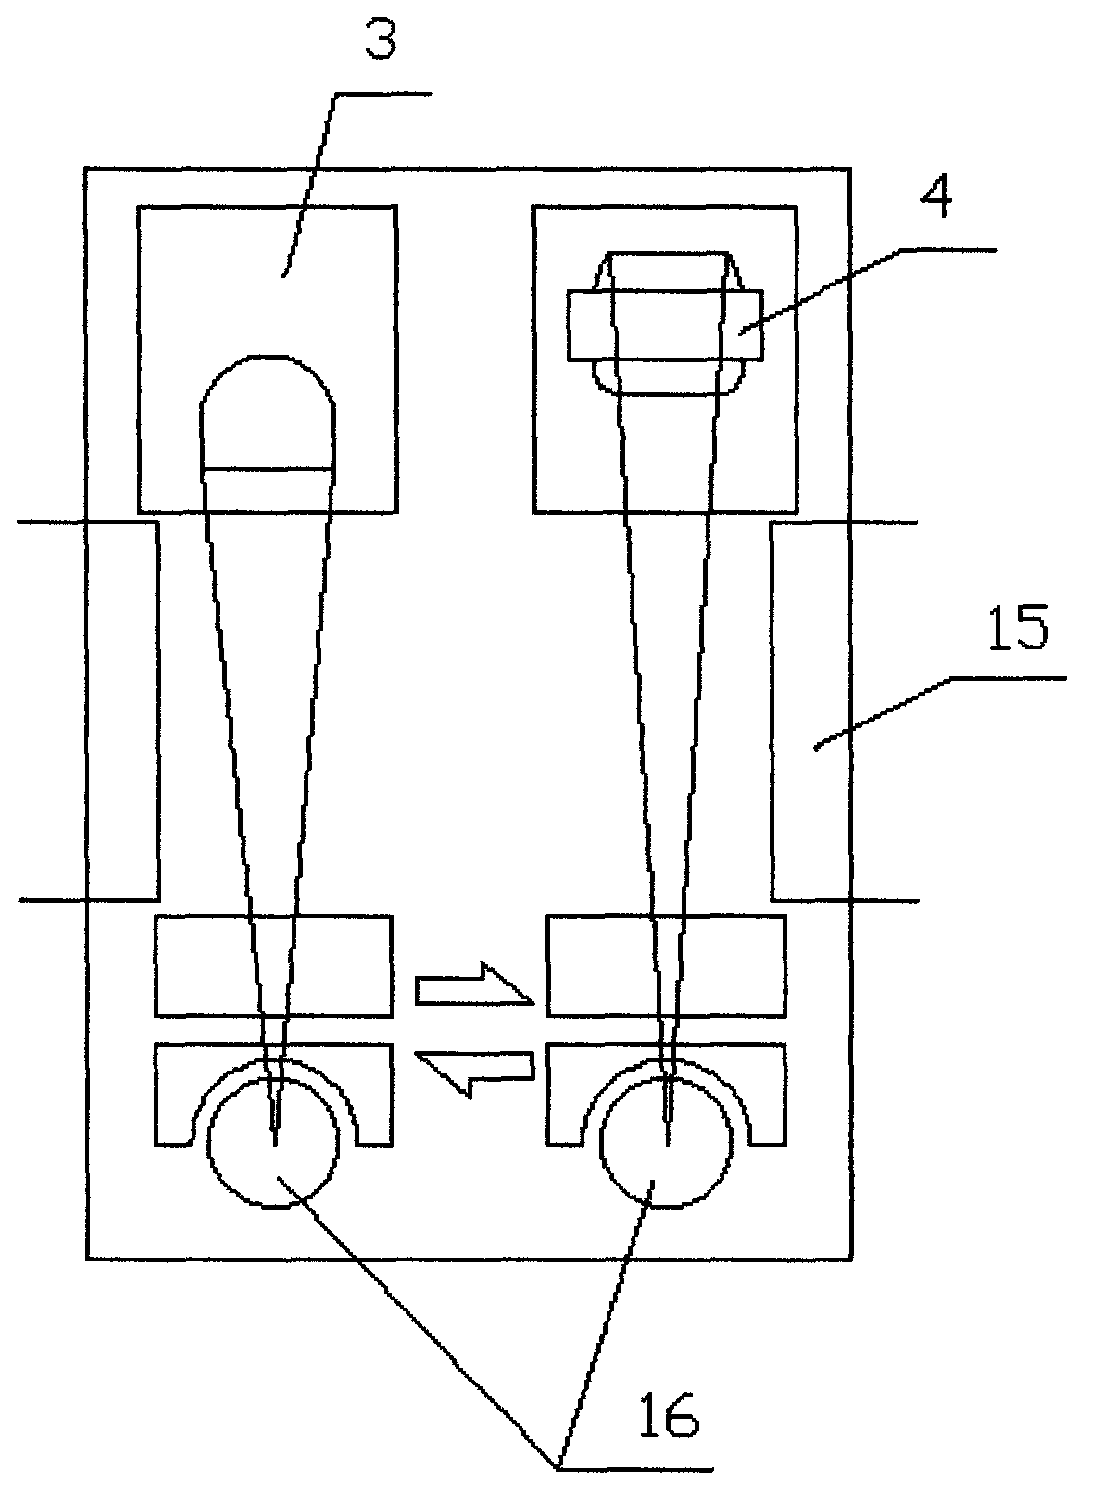 Fixed or vehicle-mounted type X-ray radiation equipment